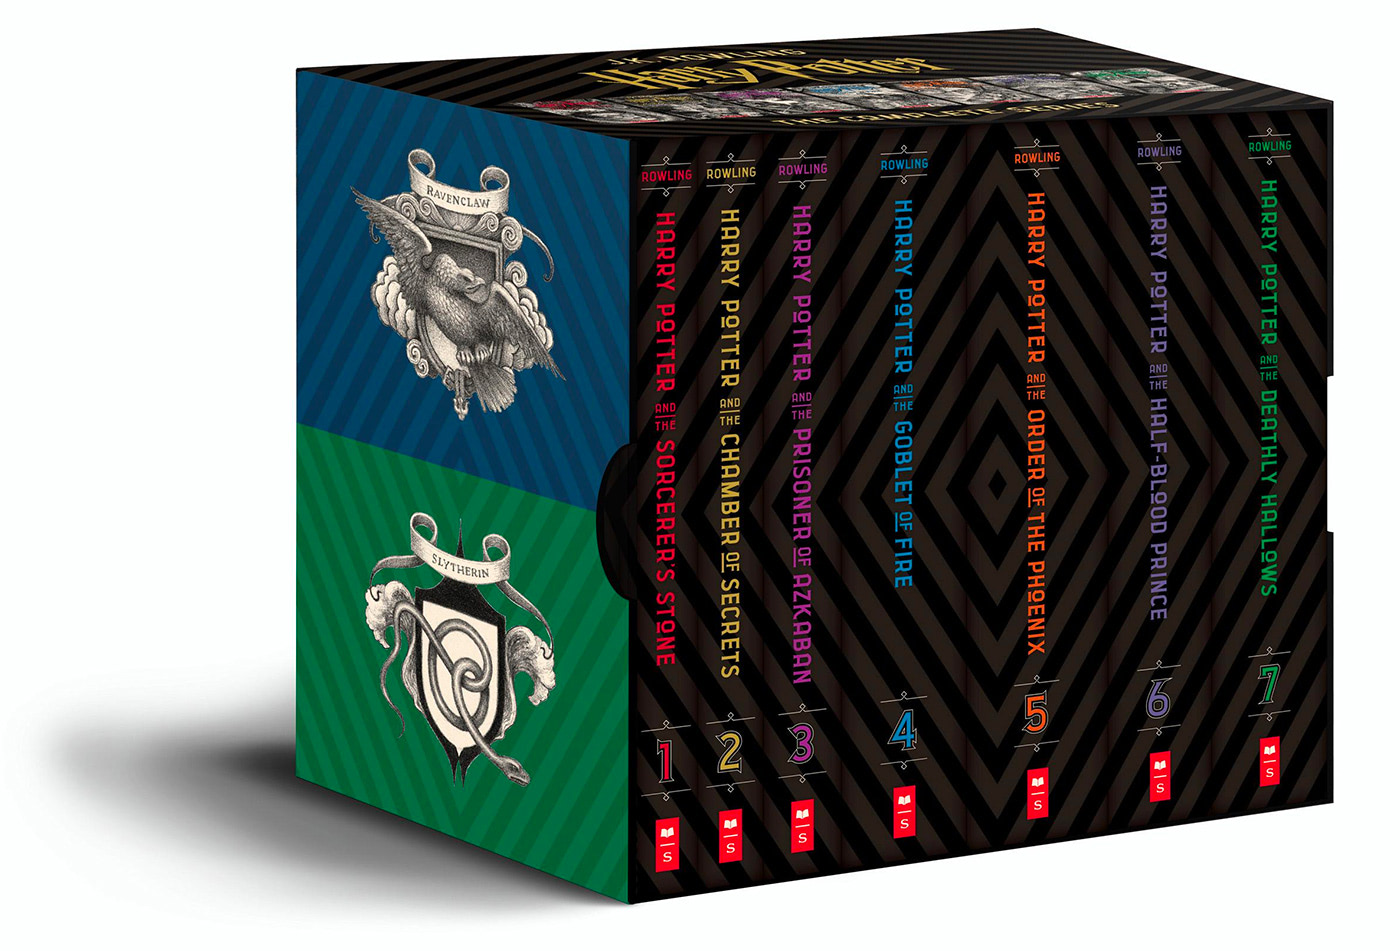 Scholastic ‘Harry Potter’ 20th anniversary edition boxed set